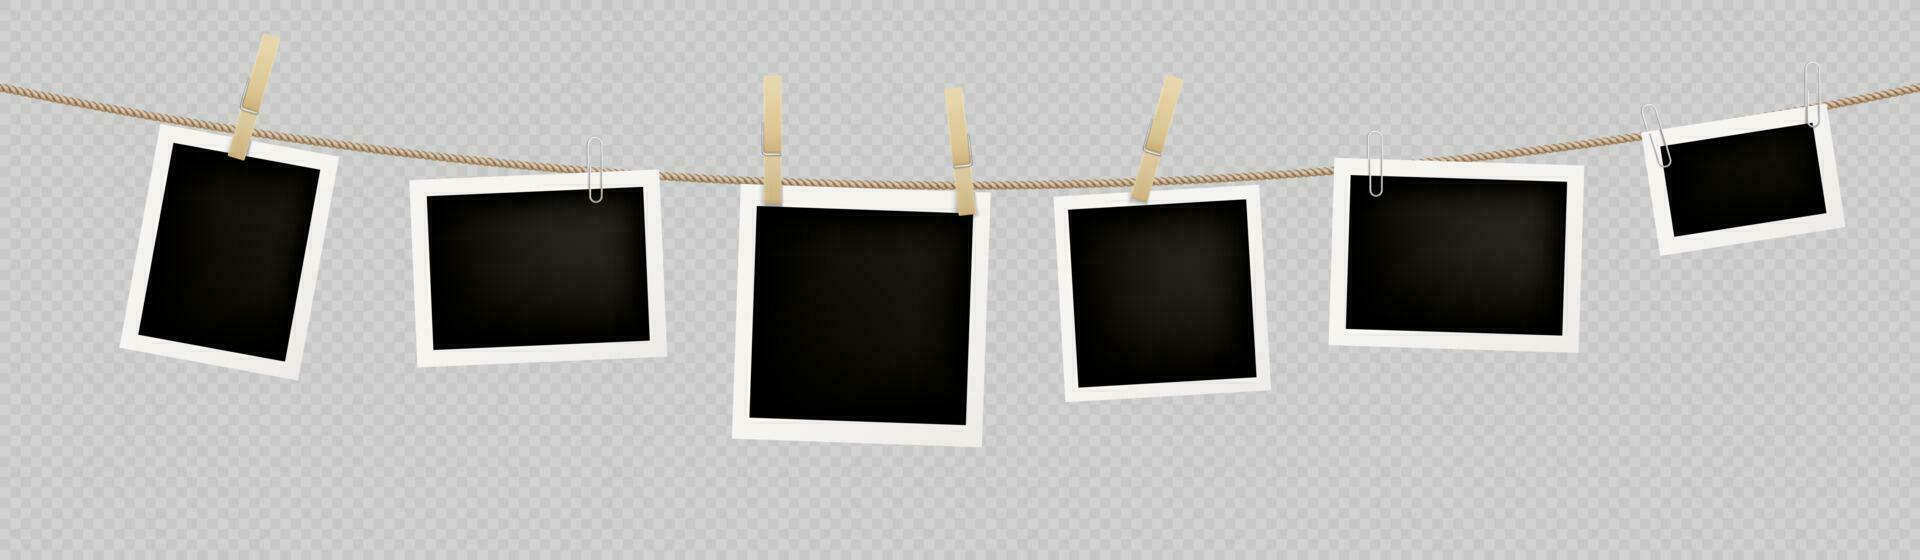 Realistic set of instant photos hanging on rope vector